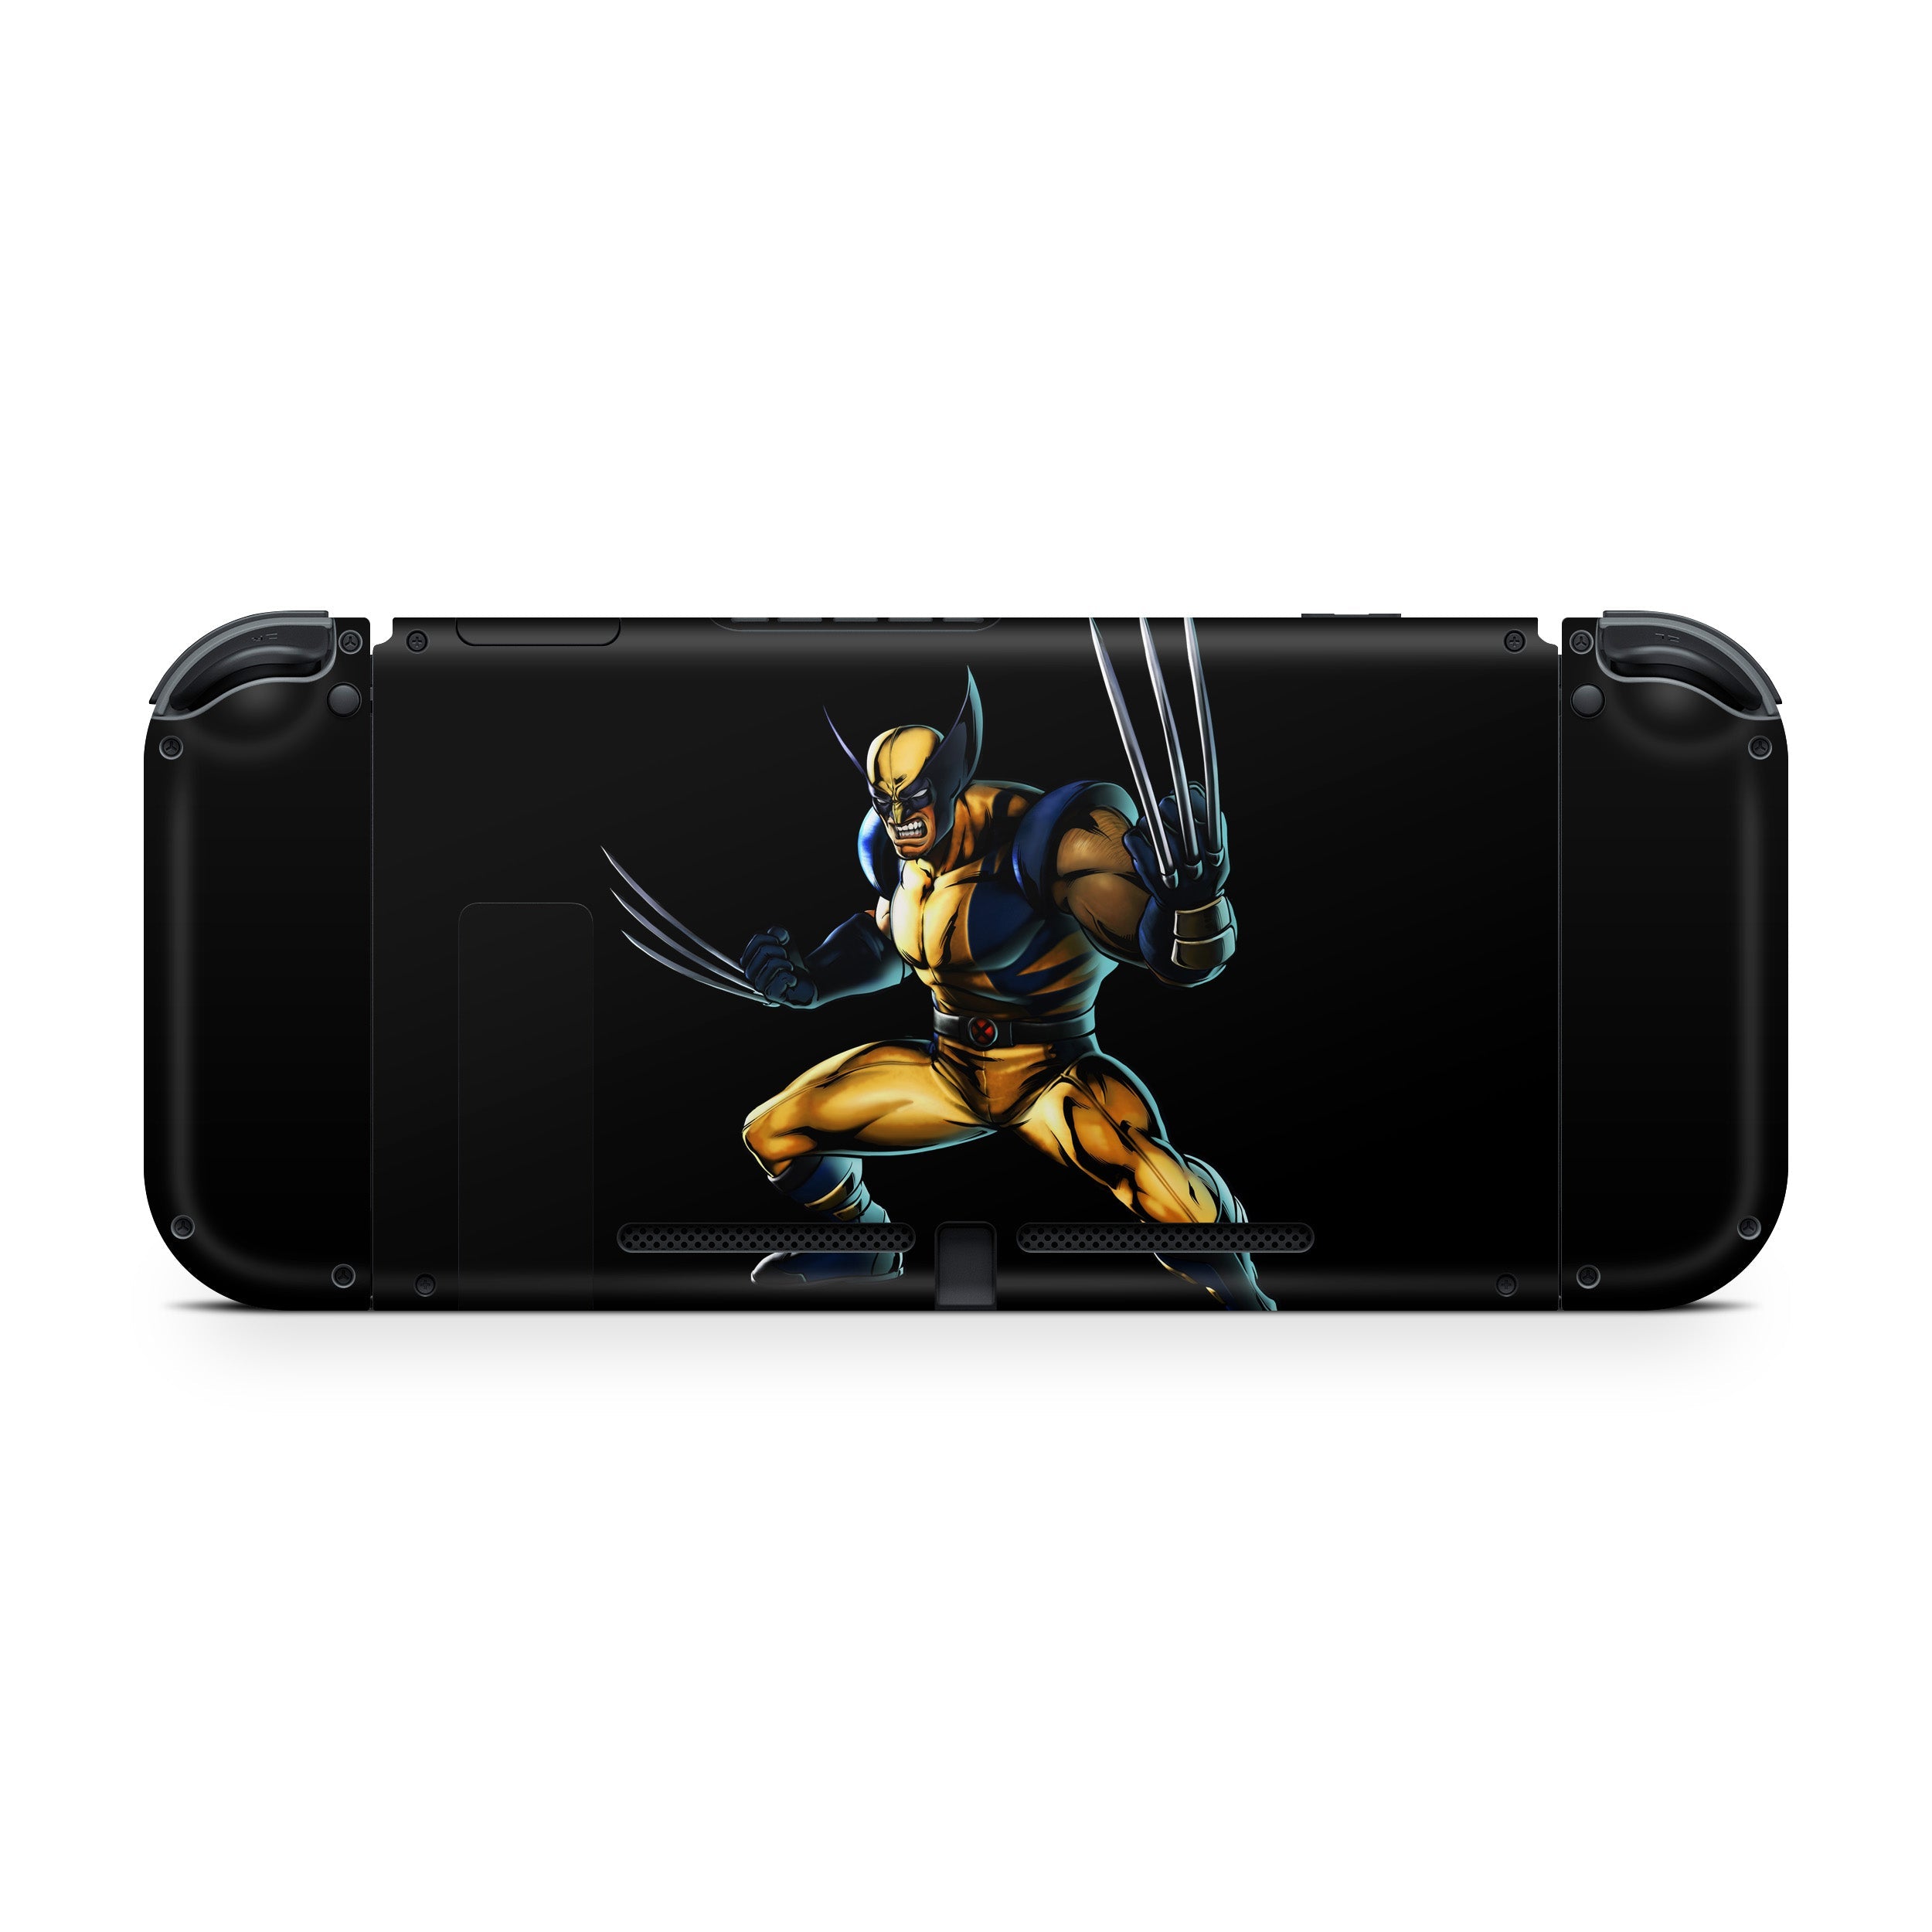 A video game skin featuring a Marvel Comics X Men Wolverine design for the Nintendo Switch.